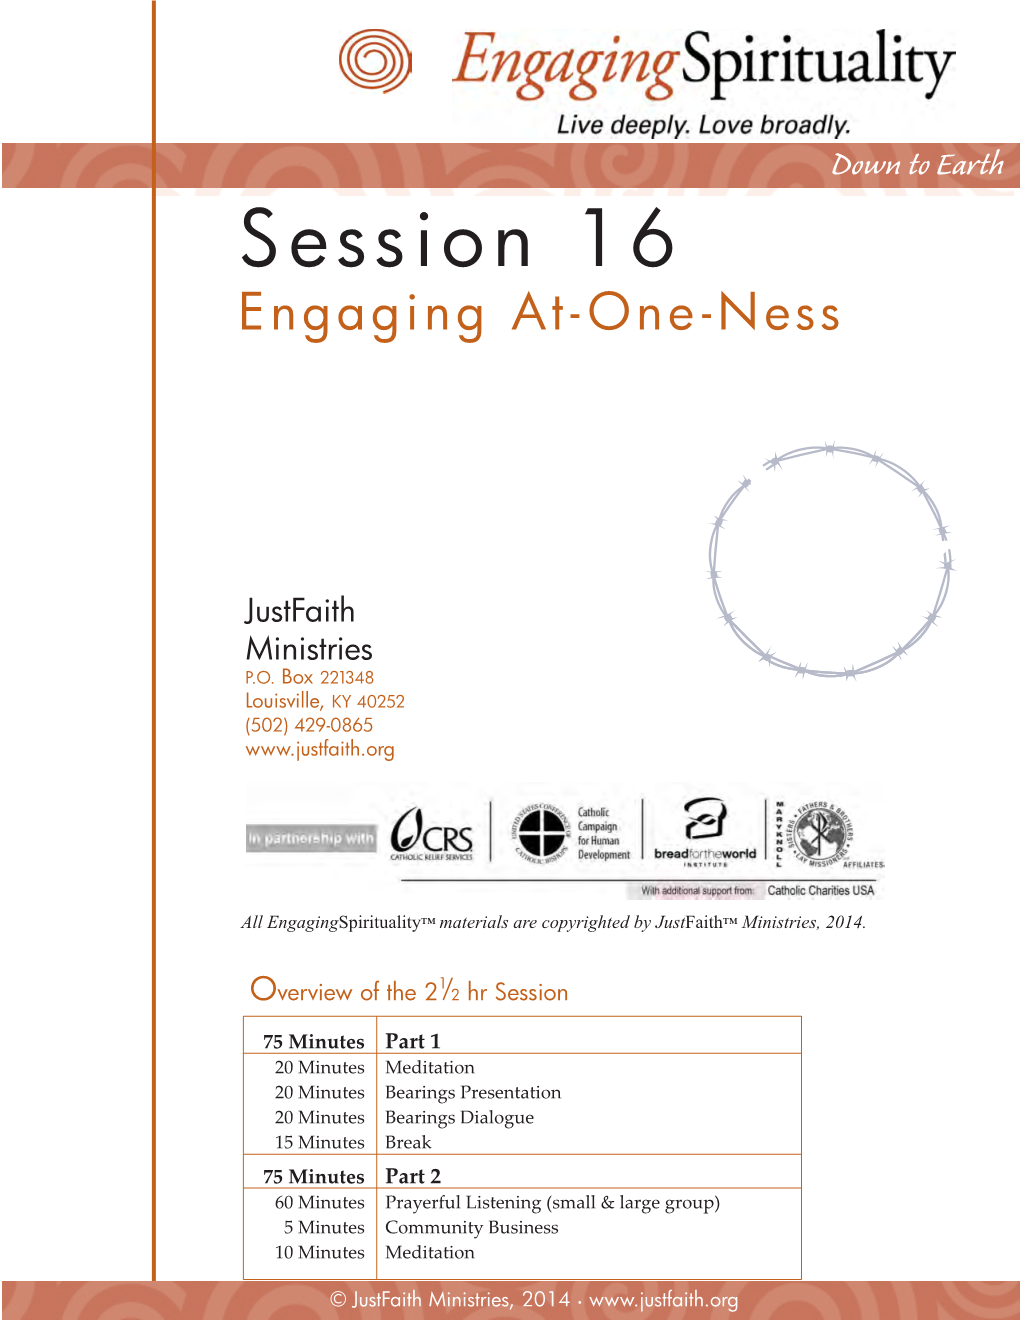 Session 16 Engaging At-One-Ness